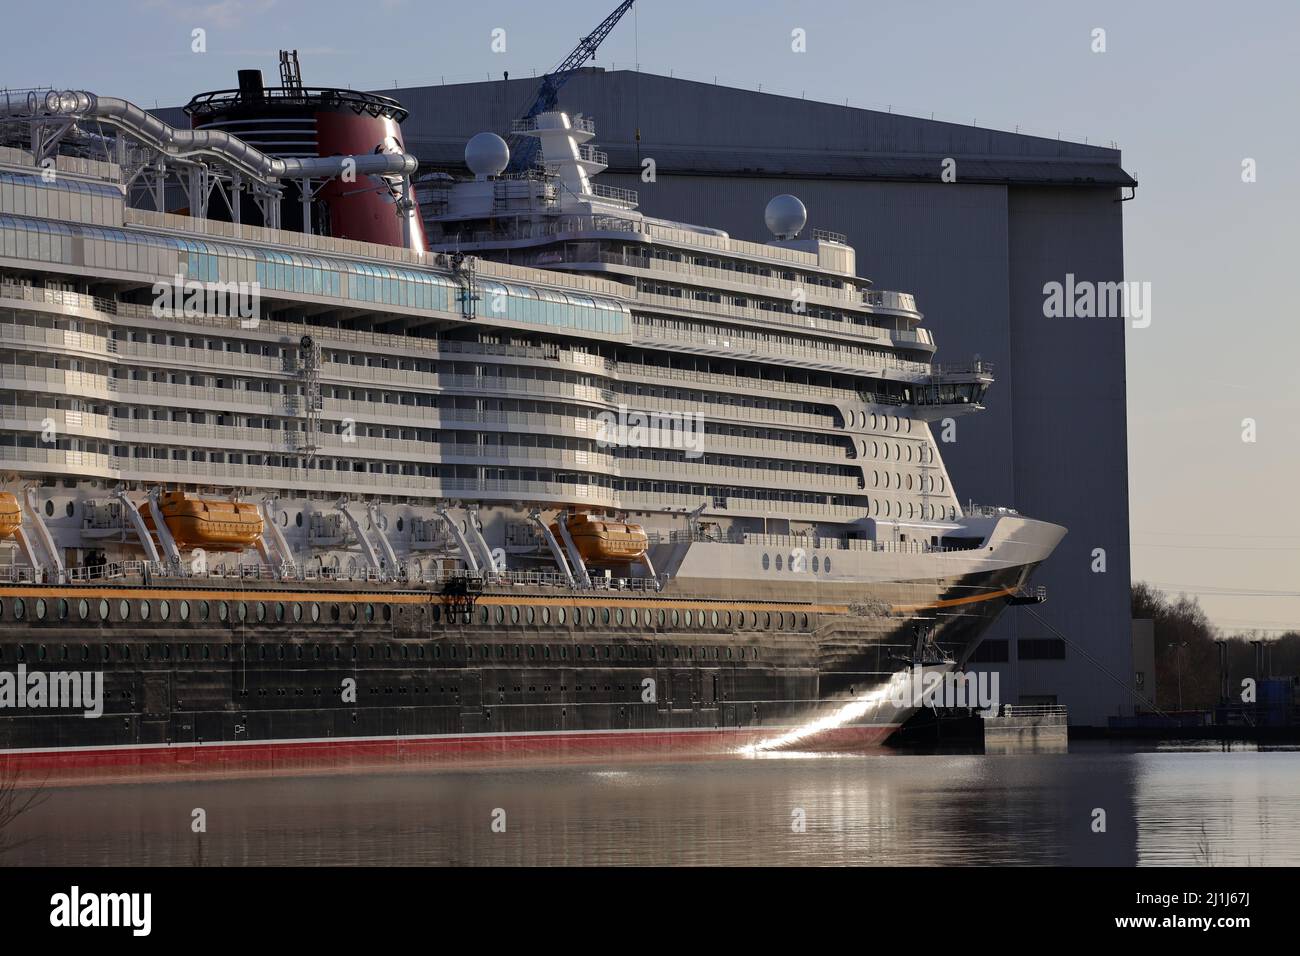 The Disney Wish cruise ship is moored in front of the Meyer shipyard in Papenburg on February 26, 2022. Stock Photo